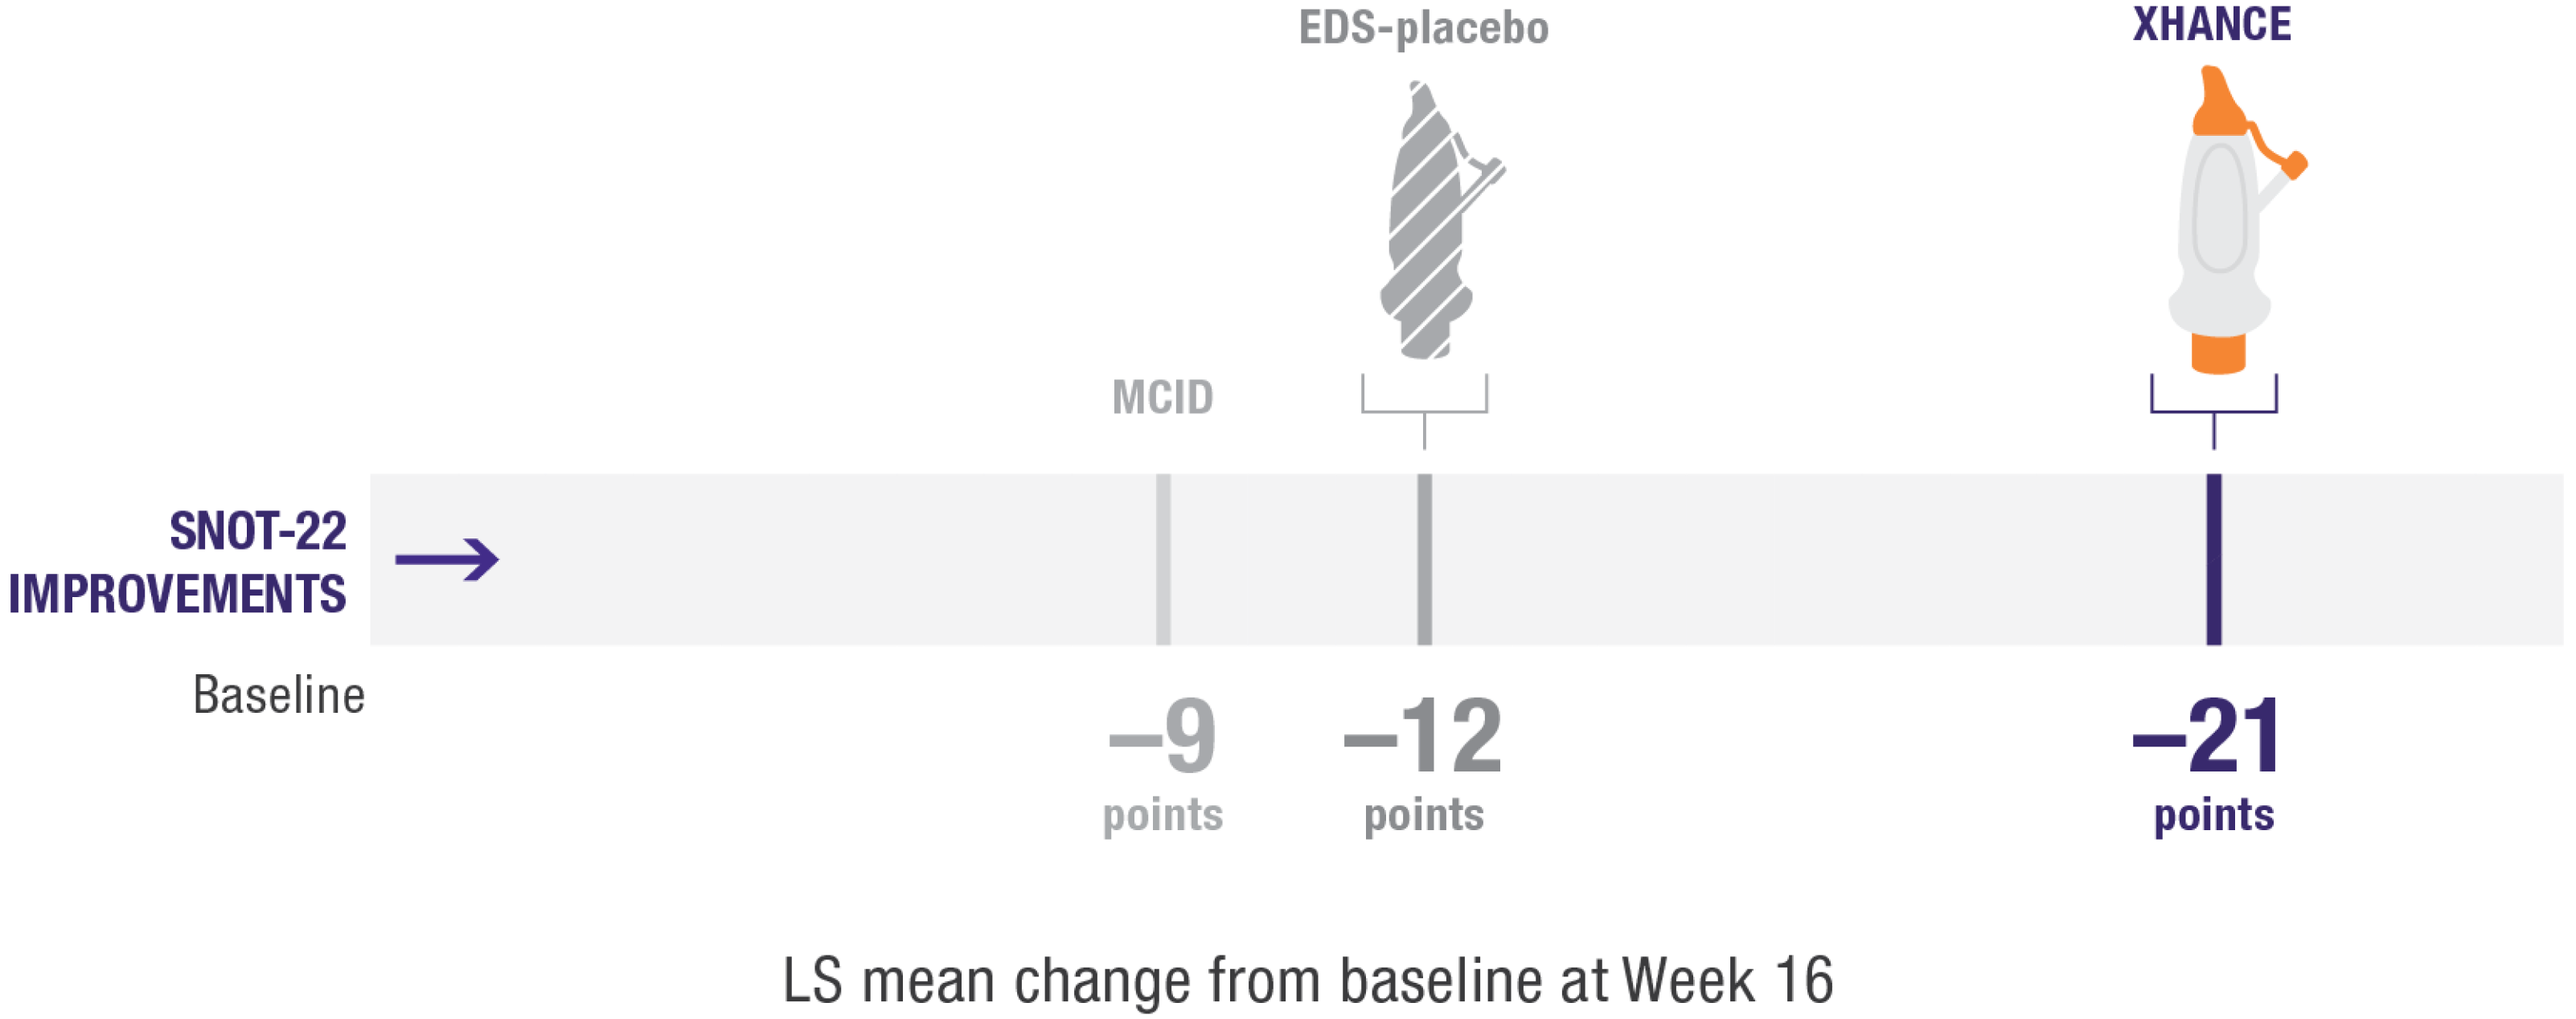 Line graph showing the change in SNOT-22 score from Week 0 to Week 16